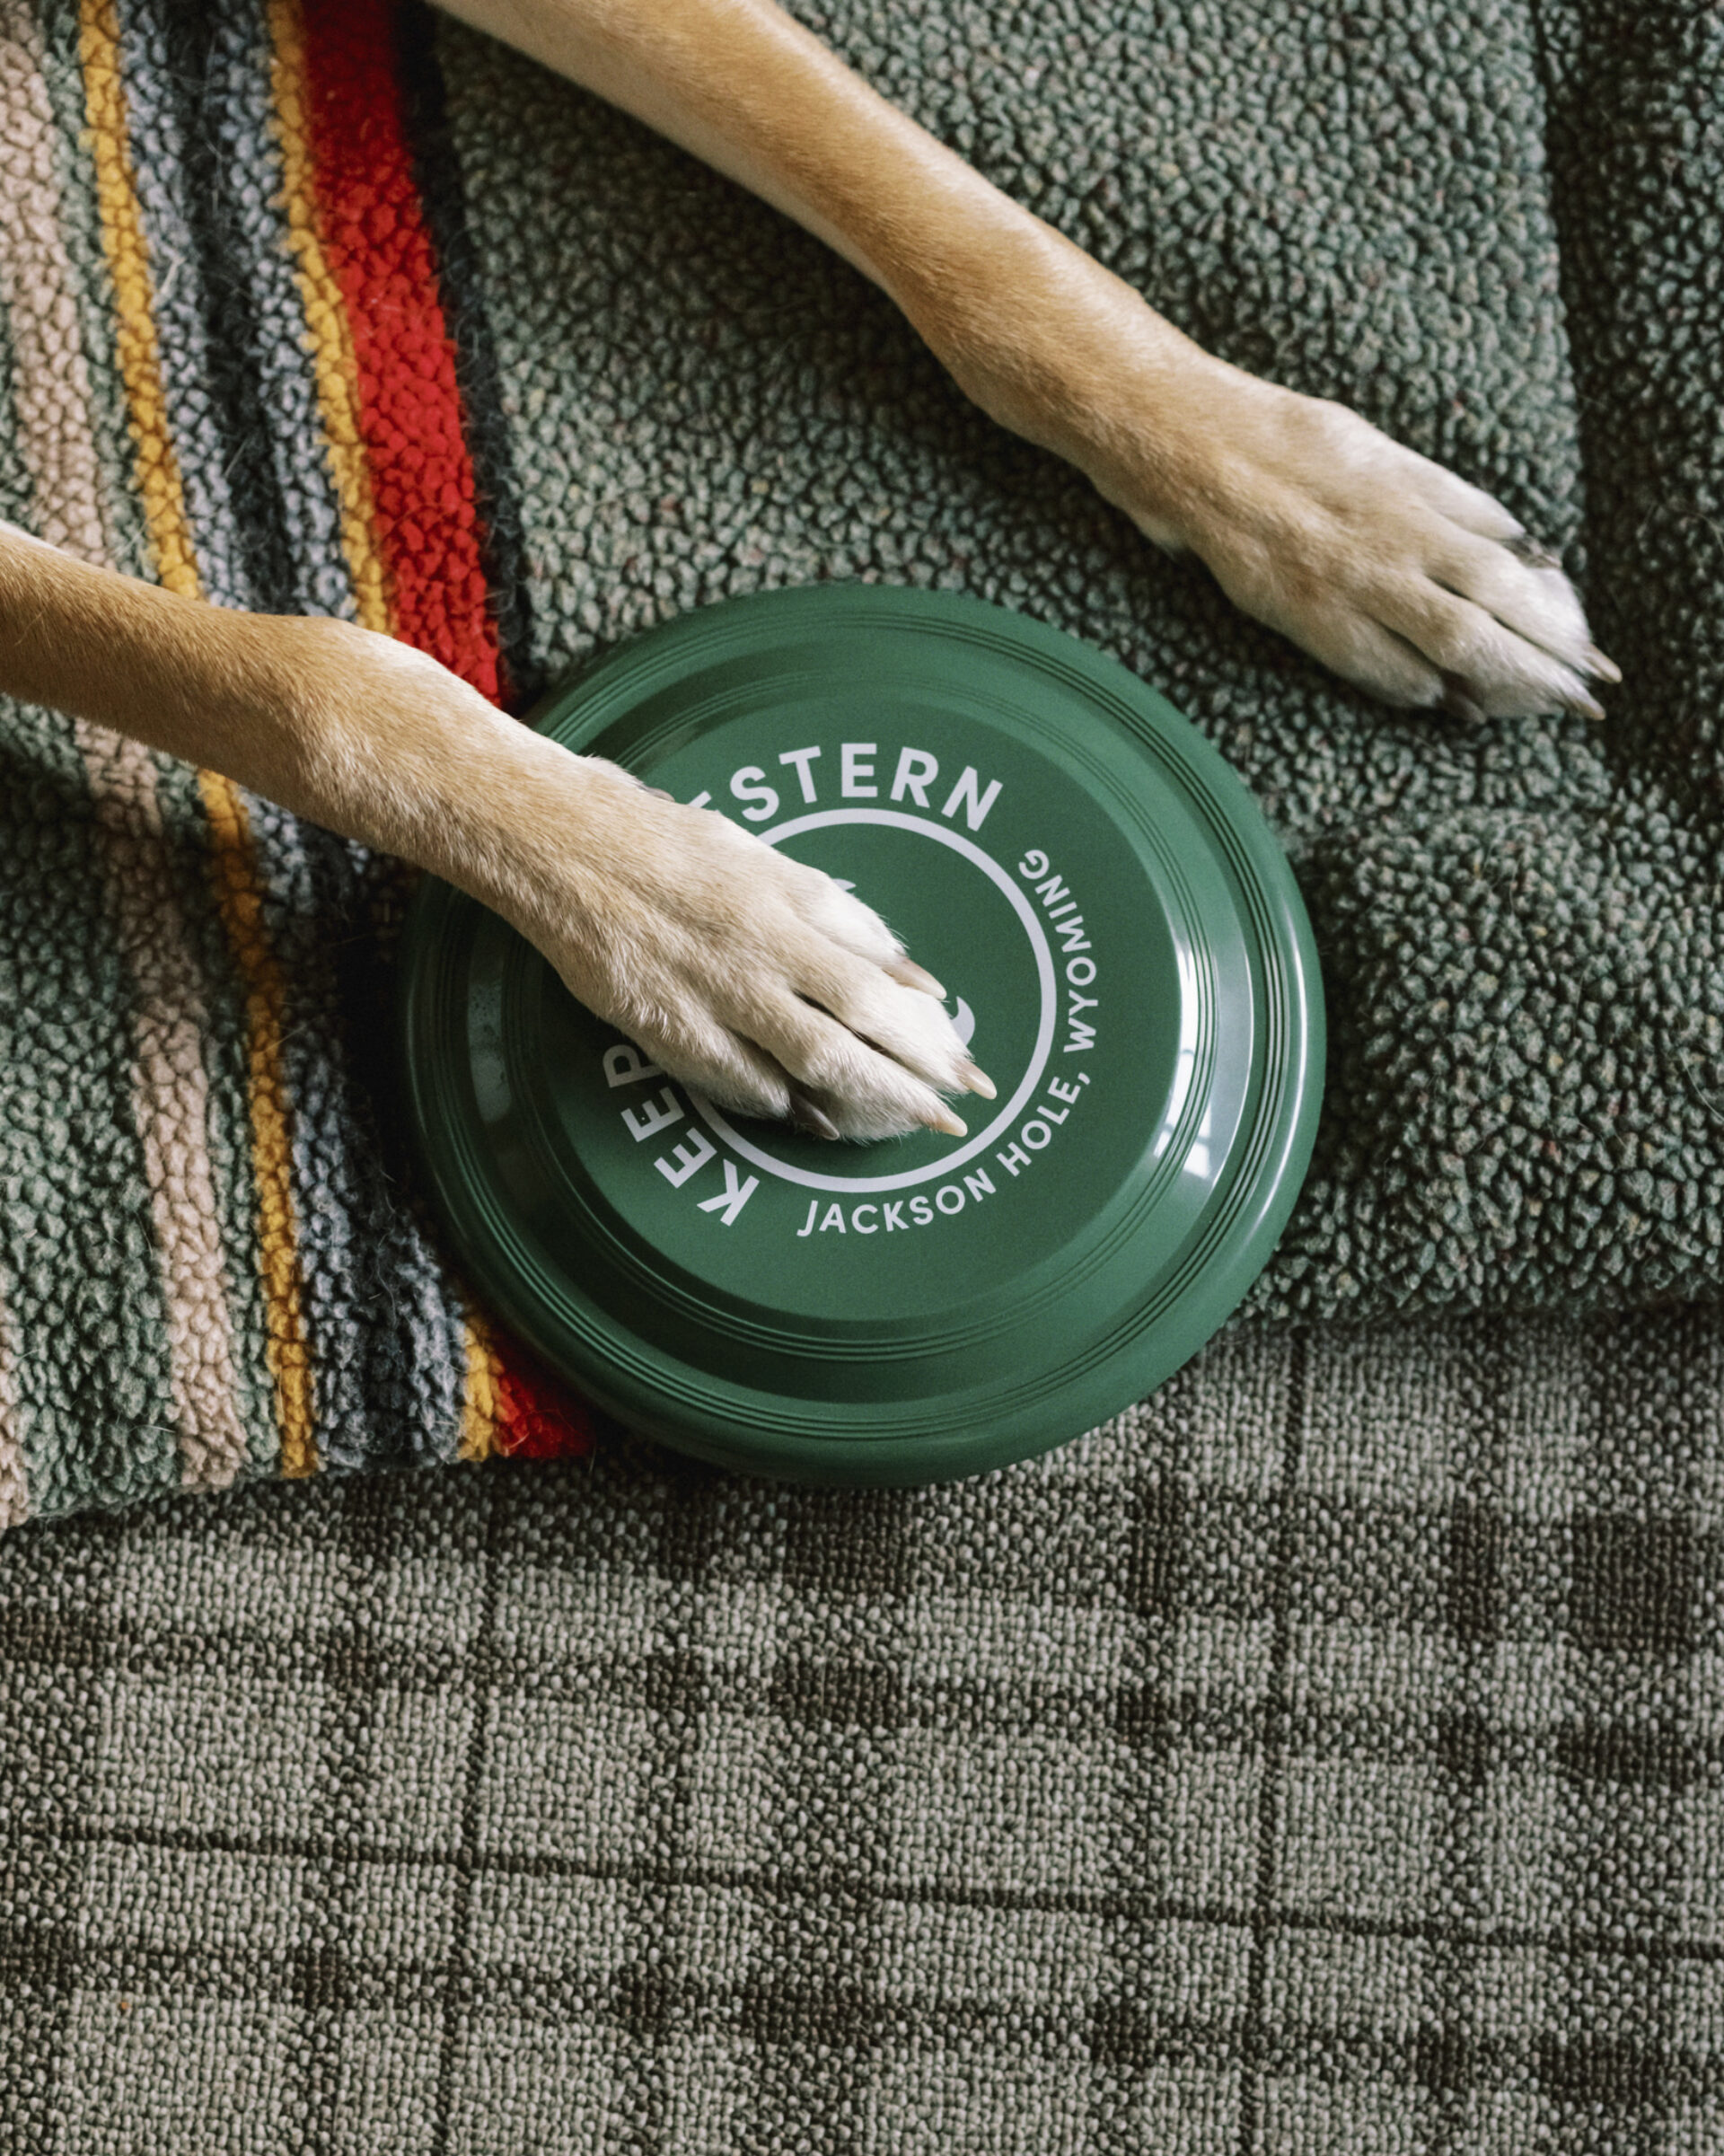 Elegant image: a dog's paw rests on a disc bearing 